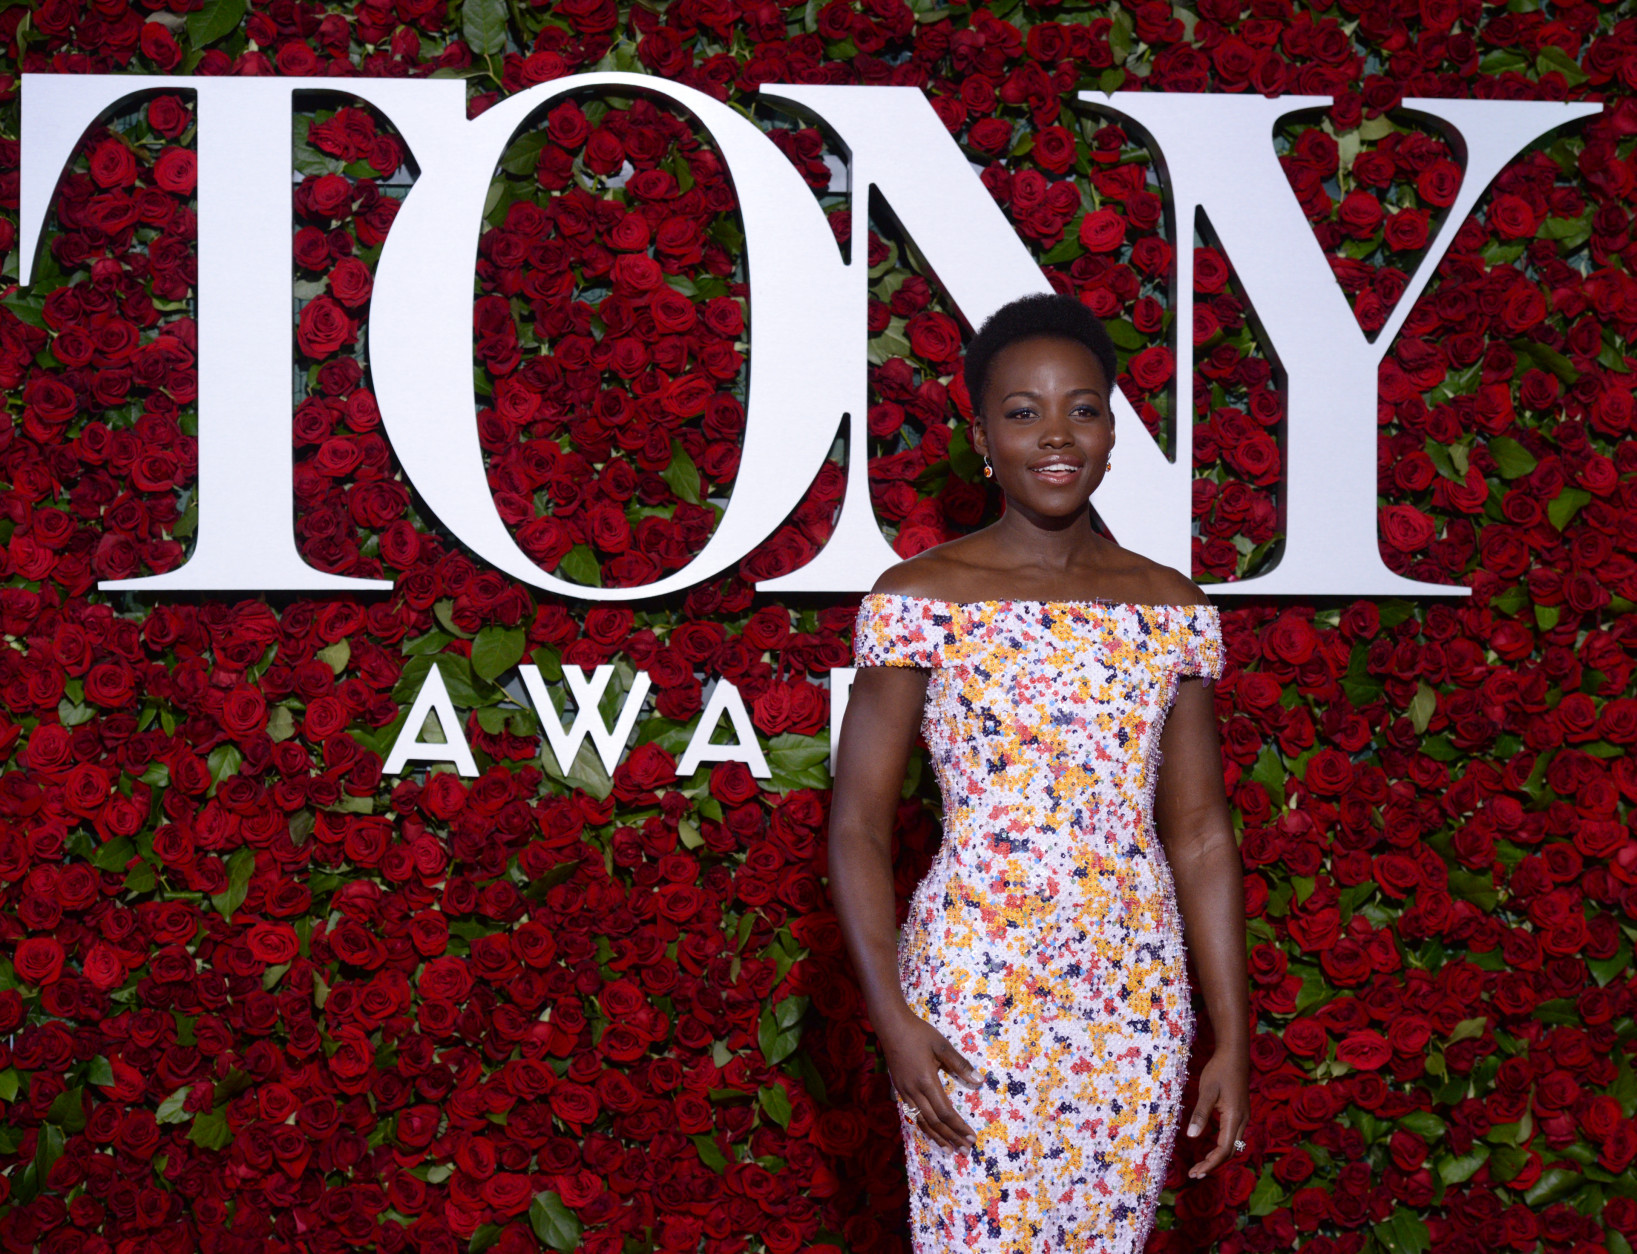 Lupita Nyong'o arrives at the Tony Awards at the Beacon Theatre on Sunday, June 12, 2016, in New York. (Photo by Charles Sykes/Invision/AP)